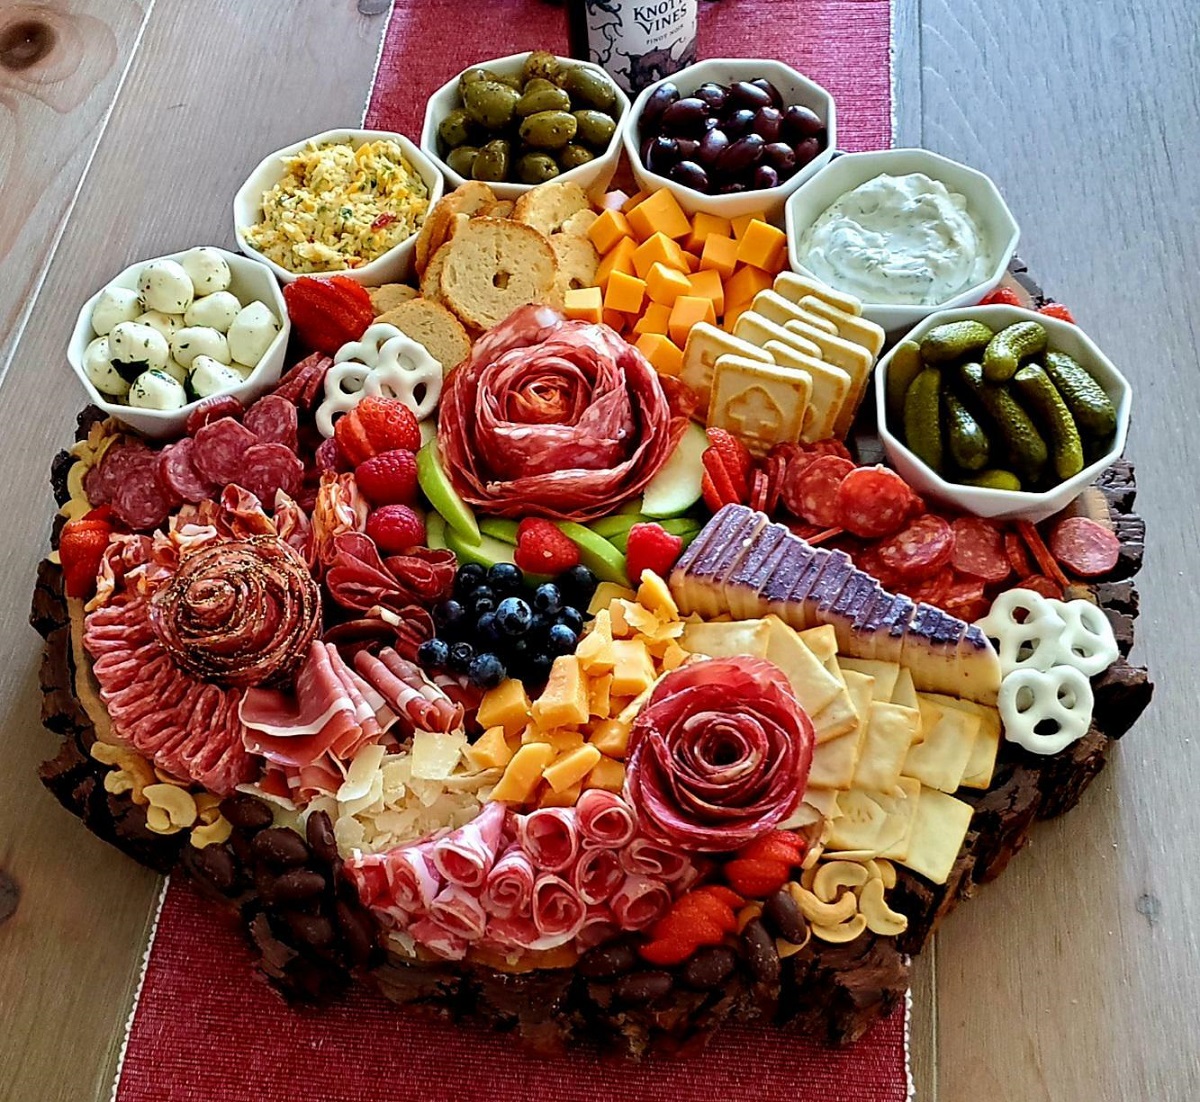 My Wife's First Attempt At A Charcuterie Board. How'd She Do?